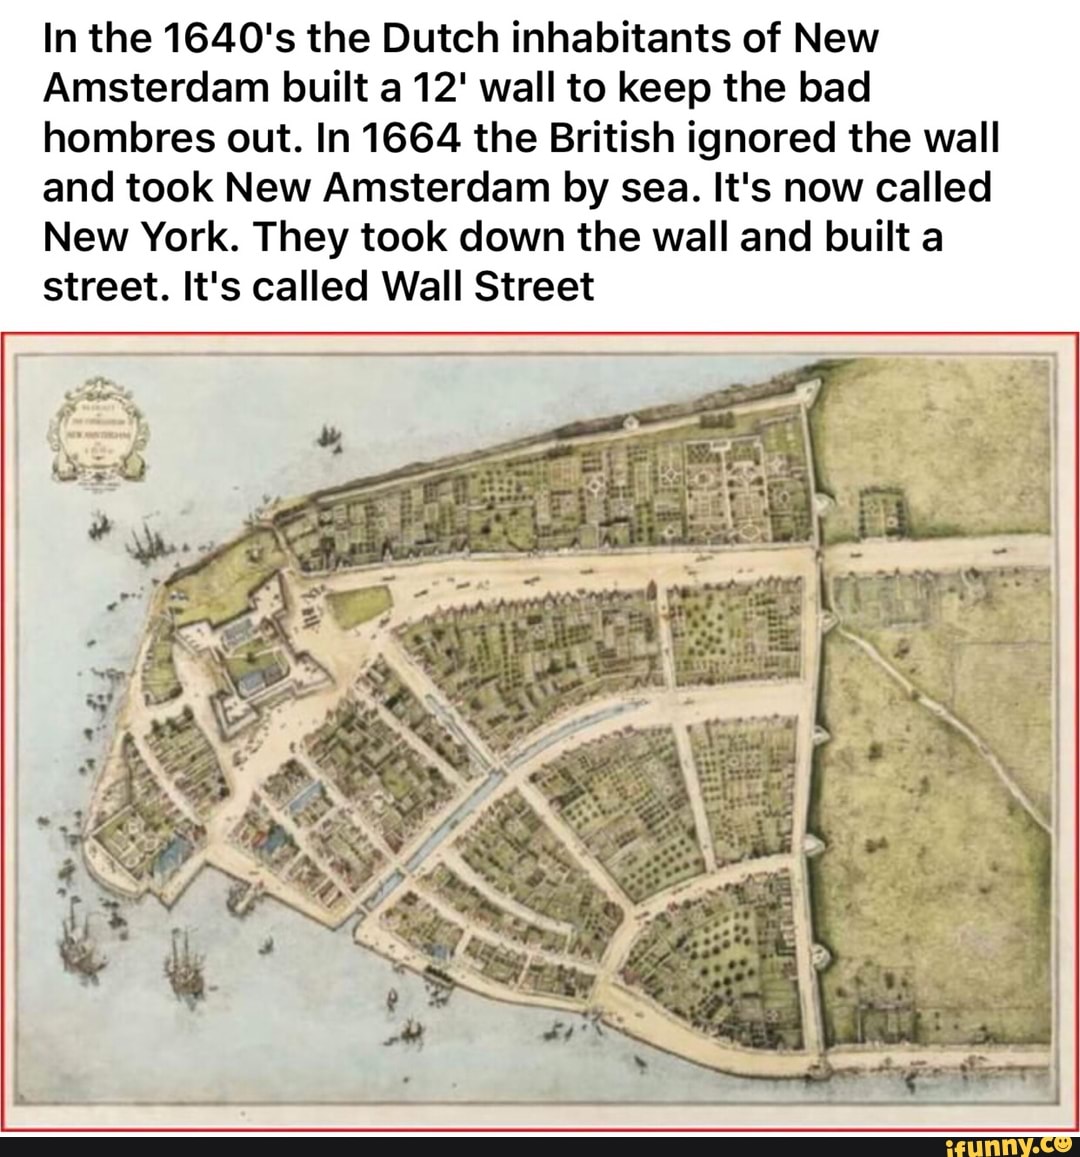 In the 1640's the Dutch inhabitants of New Amsterdam built a wall to keep the